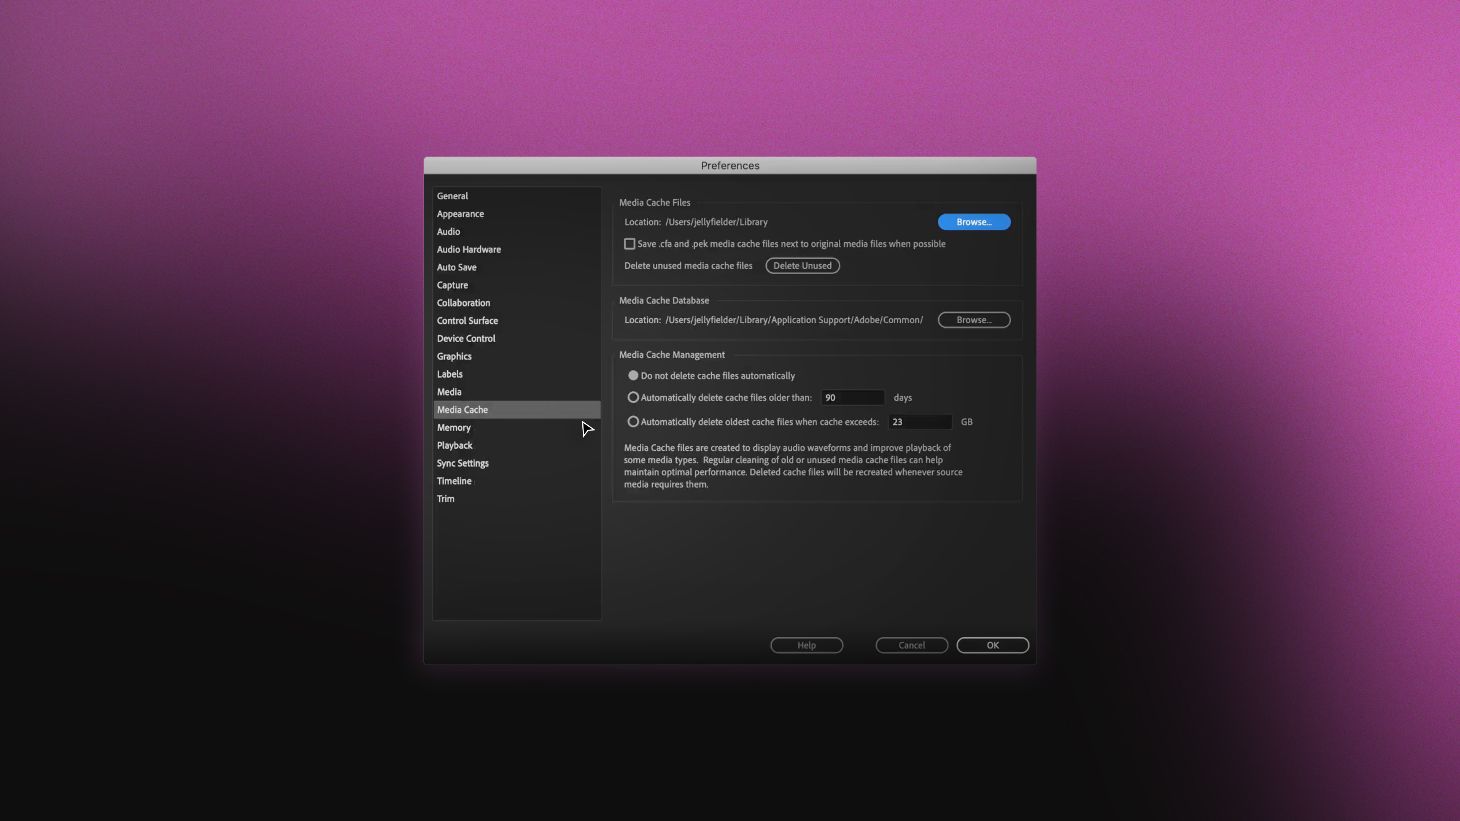 adobe premiere 6.0 system requirements